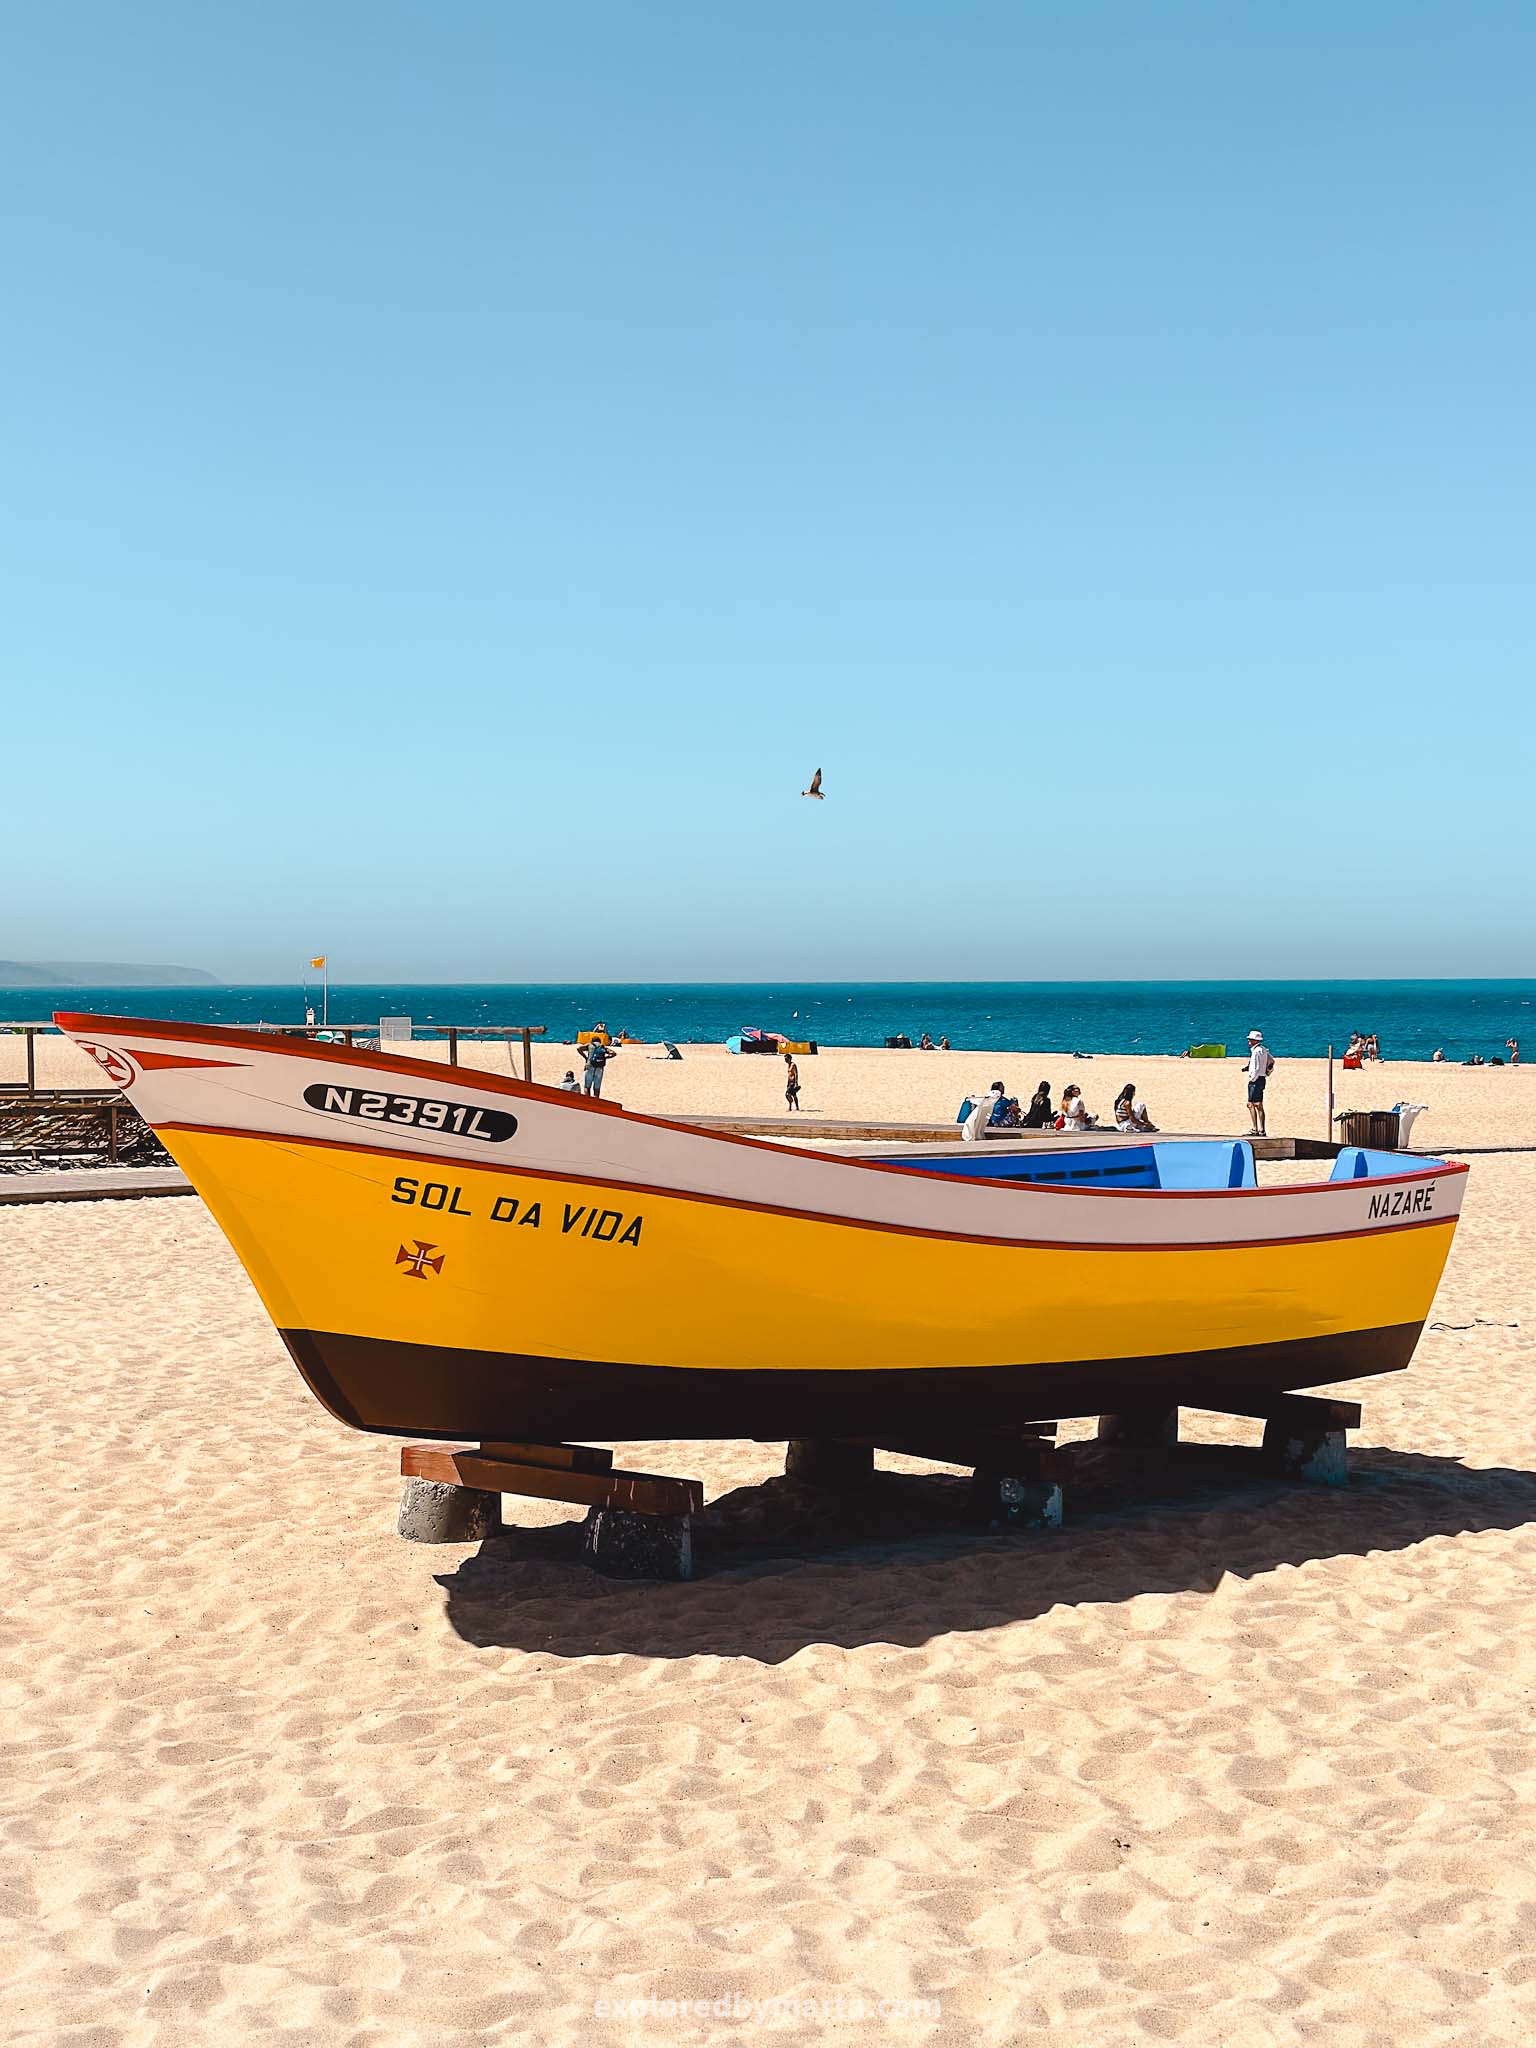 Nazaré, Portugal best things to do-Barcos Salva Vidas, an outdoor exhibition of old boats